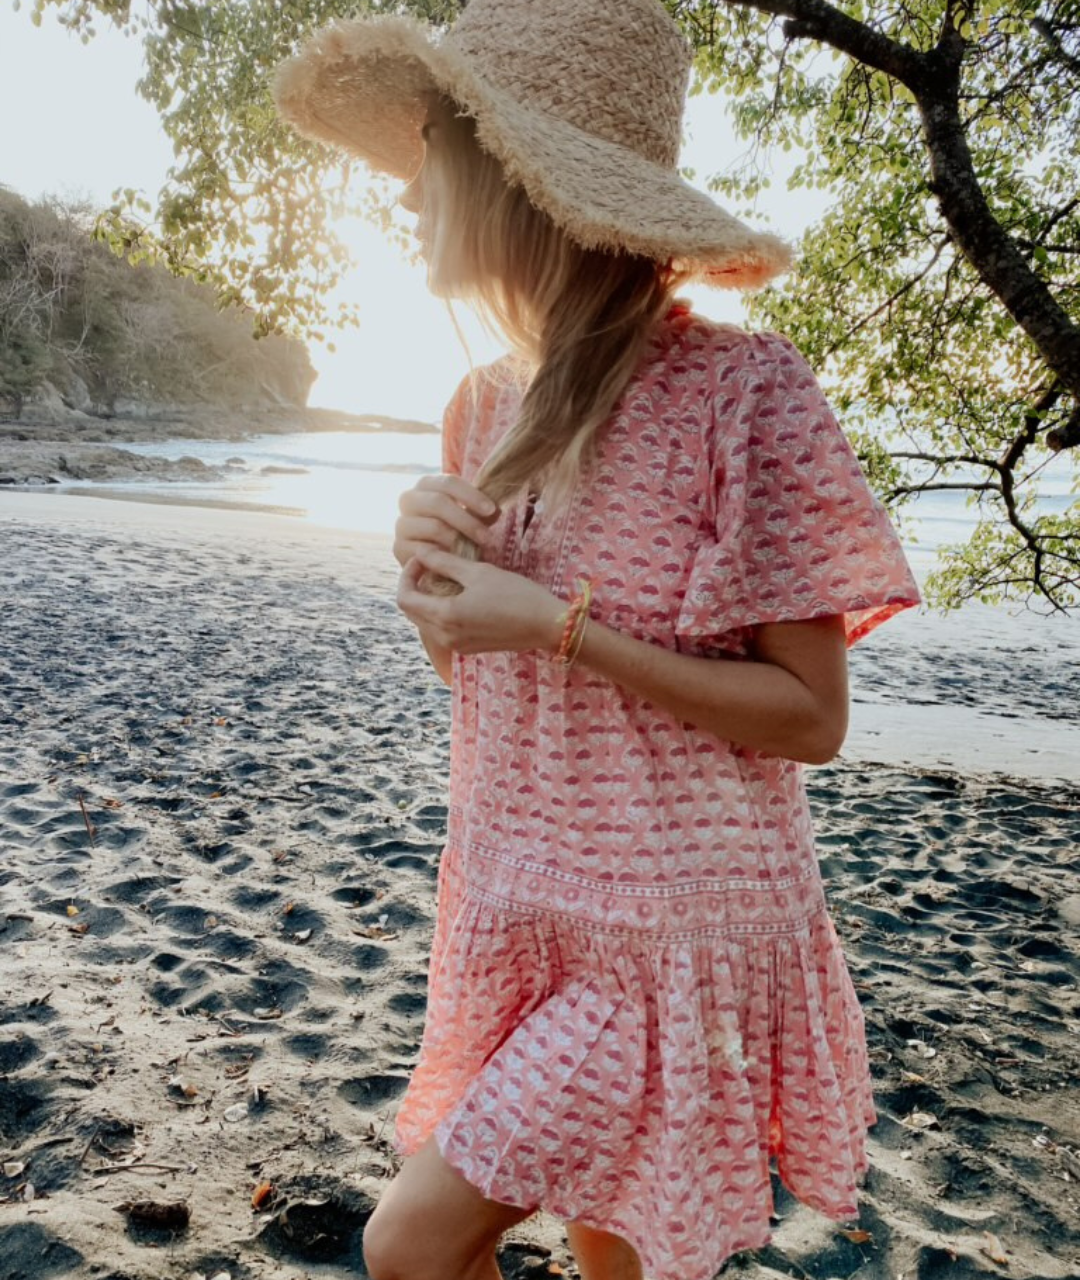 Double Duty - Dresses That Make Great Cover Ups